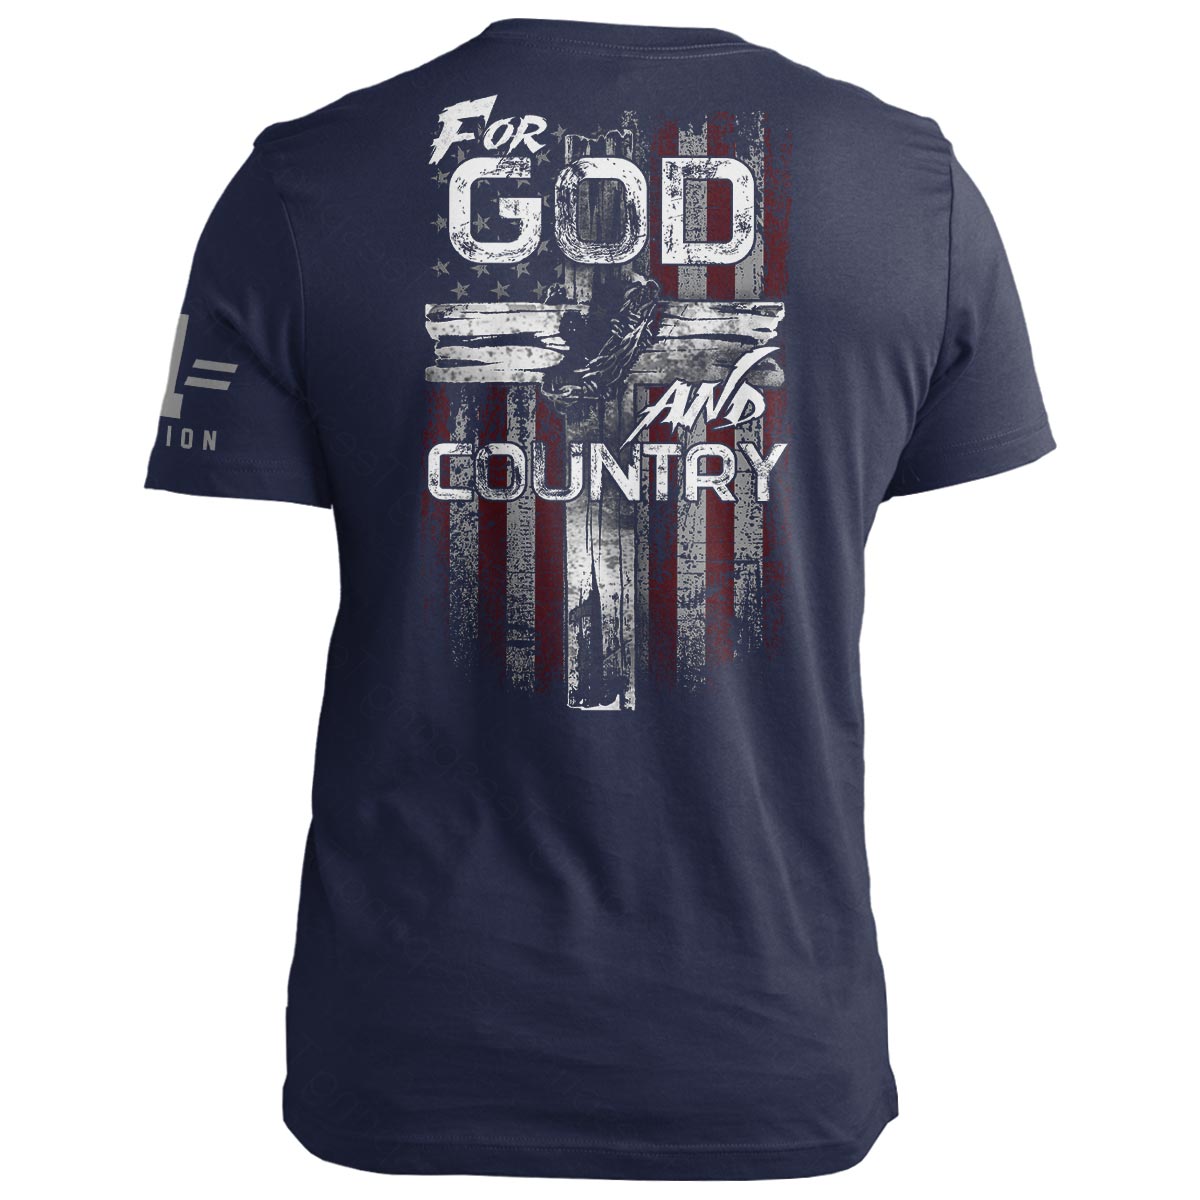 For God and Country